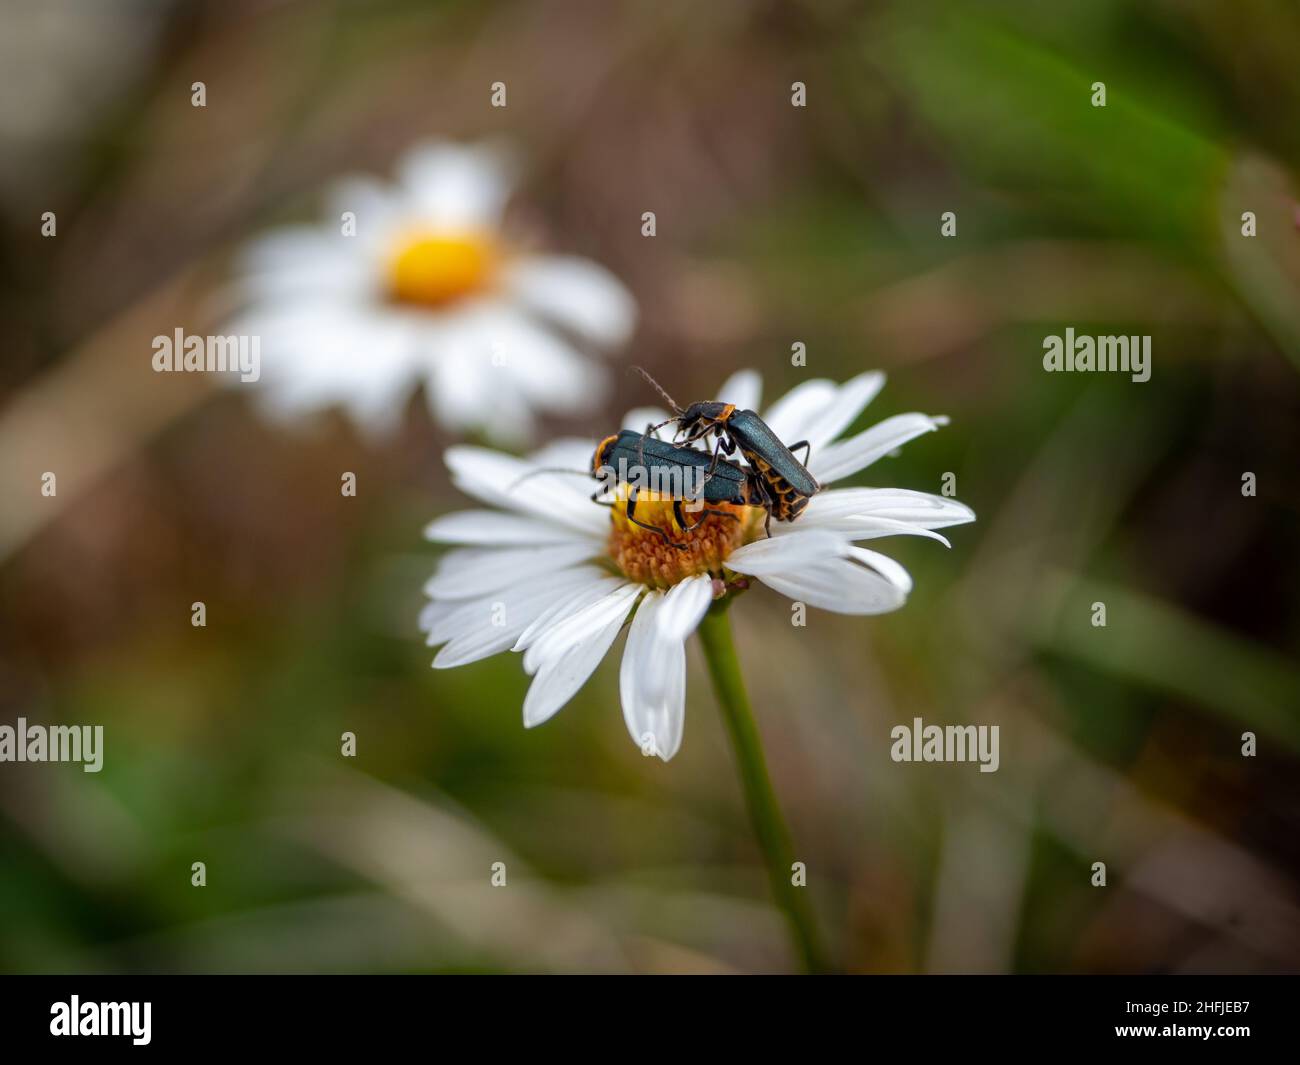 Two Plague Soldier beetles on an Ox-eye daisy Stock Photo